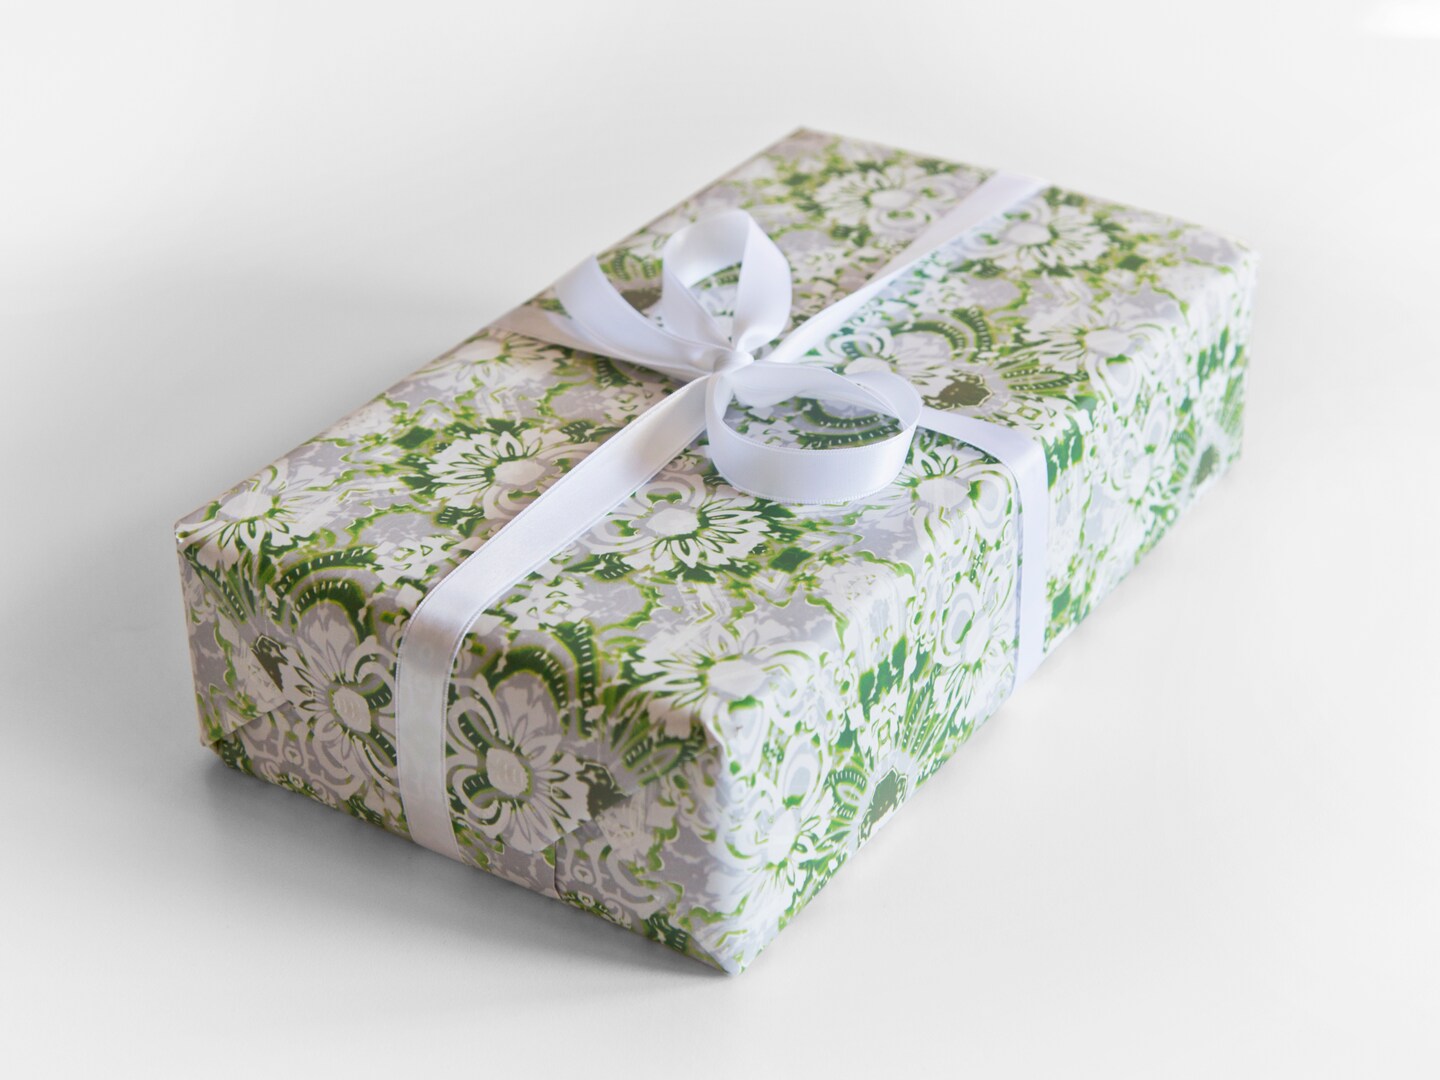 Redoute Floral Gift Wrapping Paper in Black - 30 x 5' Roll